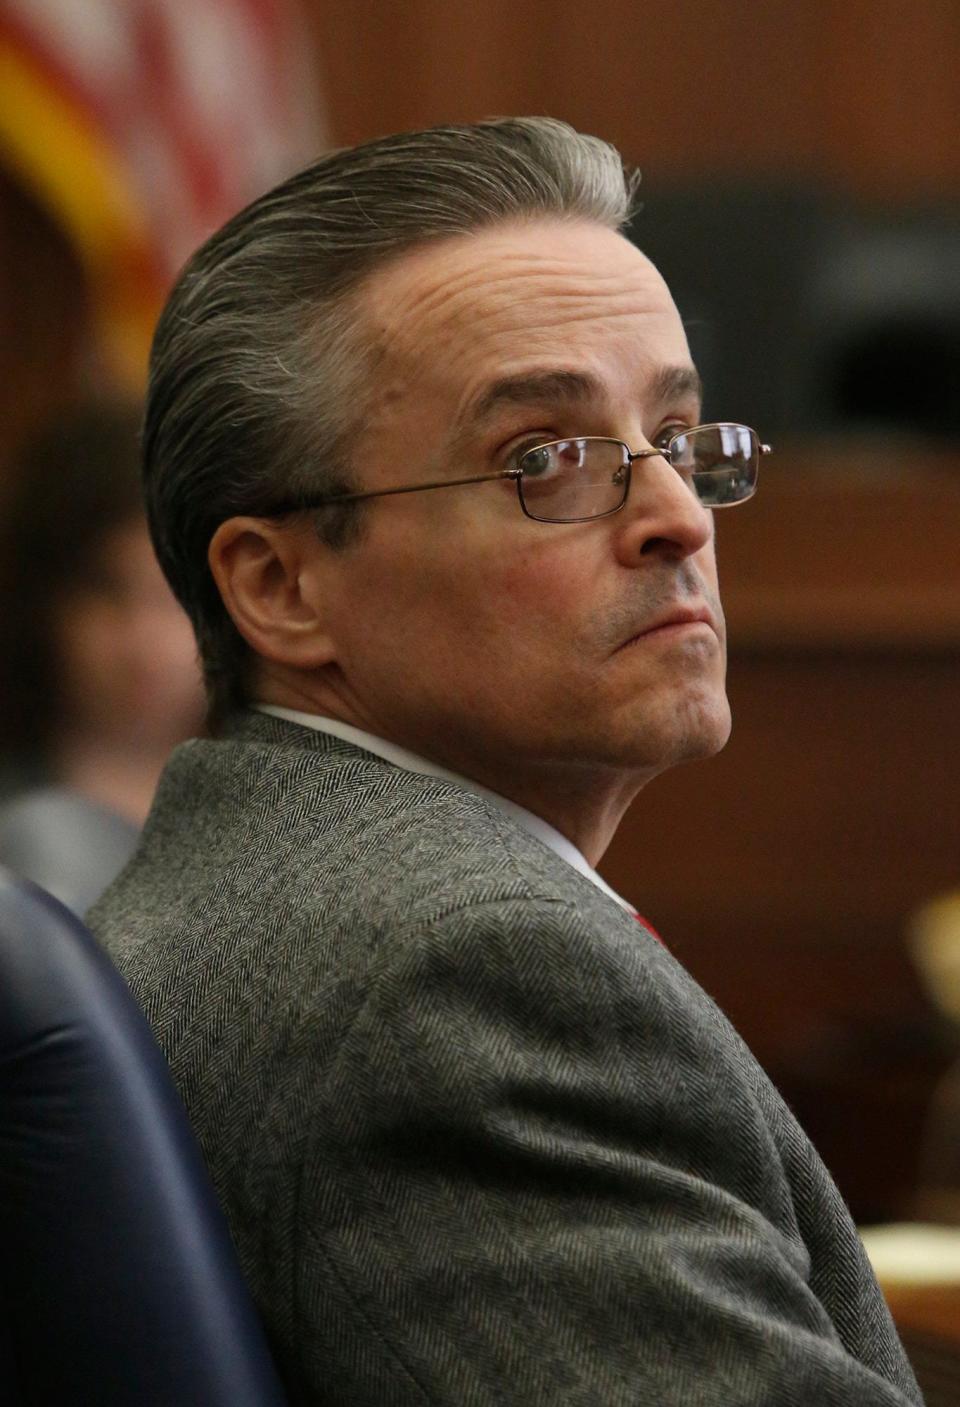 Willard McCarley was convicted during his third trial in the 1992 slaying of Charlene Puffenbarger, his former girlfriend.